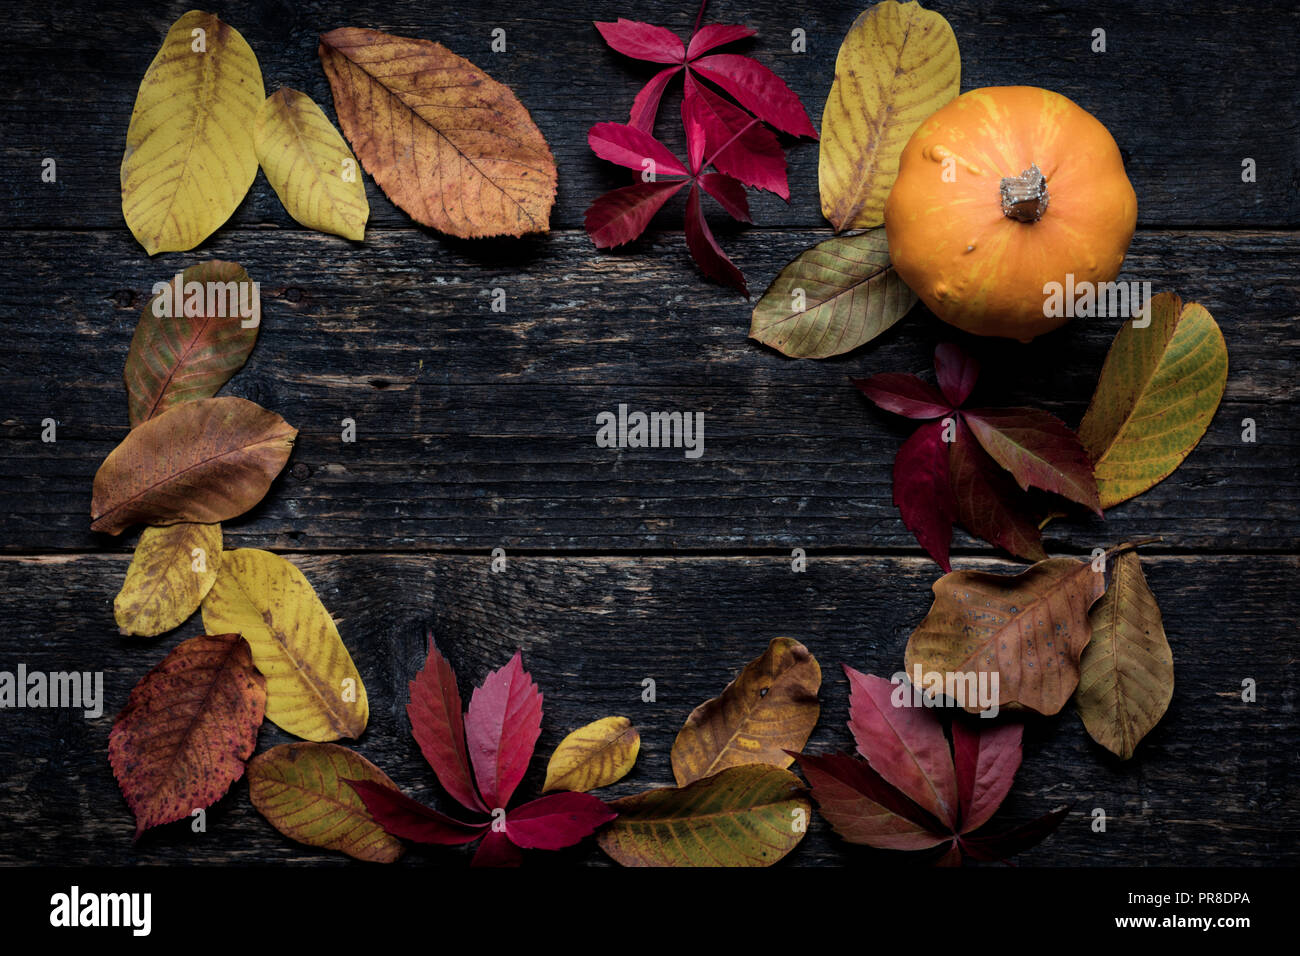 Happy Thanksgiving. Pumpkin and fallen leaves on dark wooden background. Autumn vegetables and seasonal decorations. Autumn Harvest and Holiday still  Stock Photo